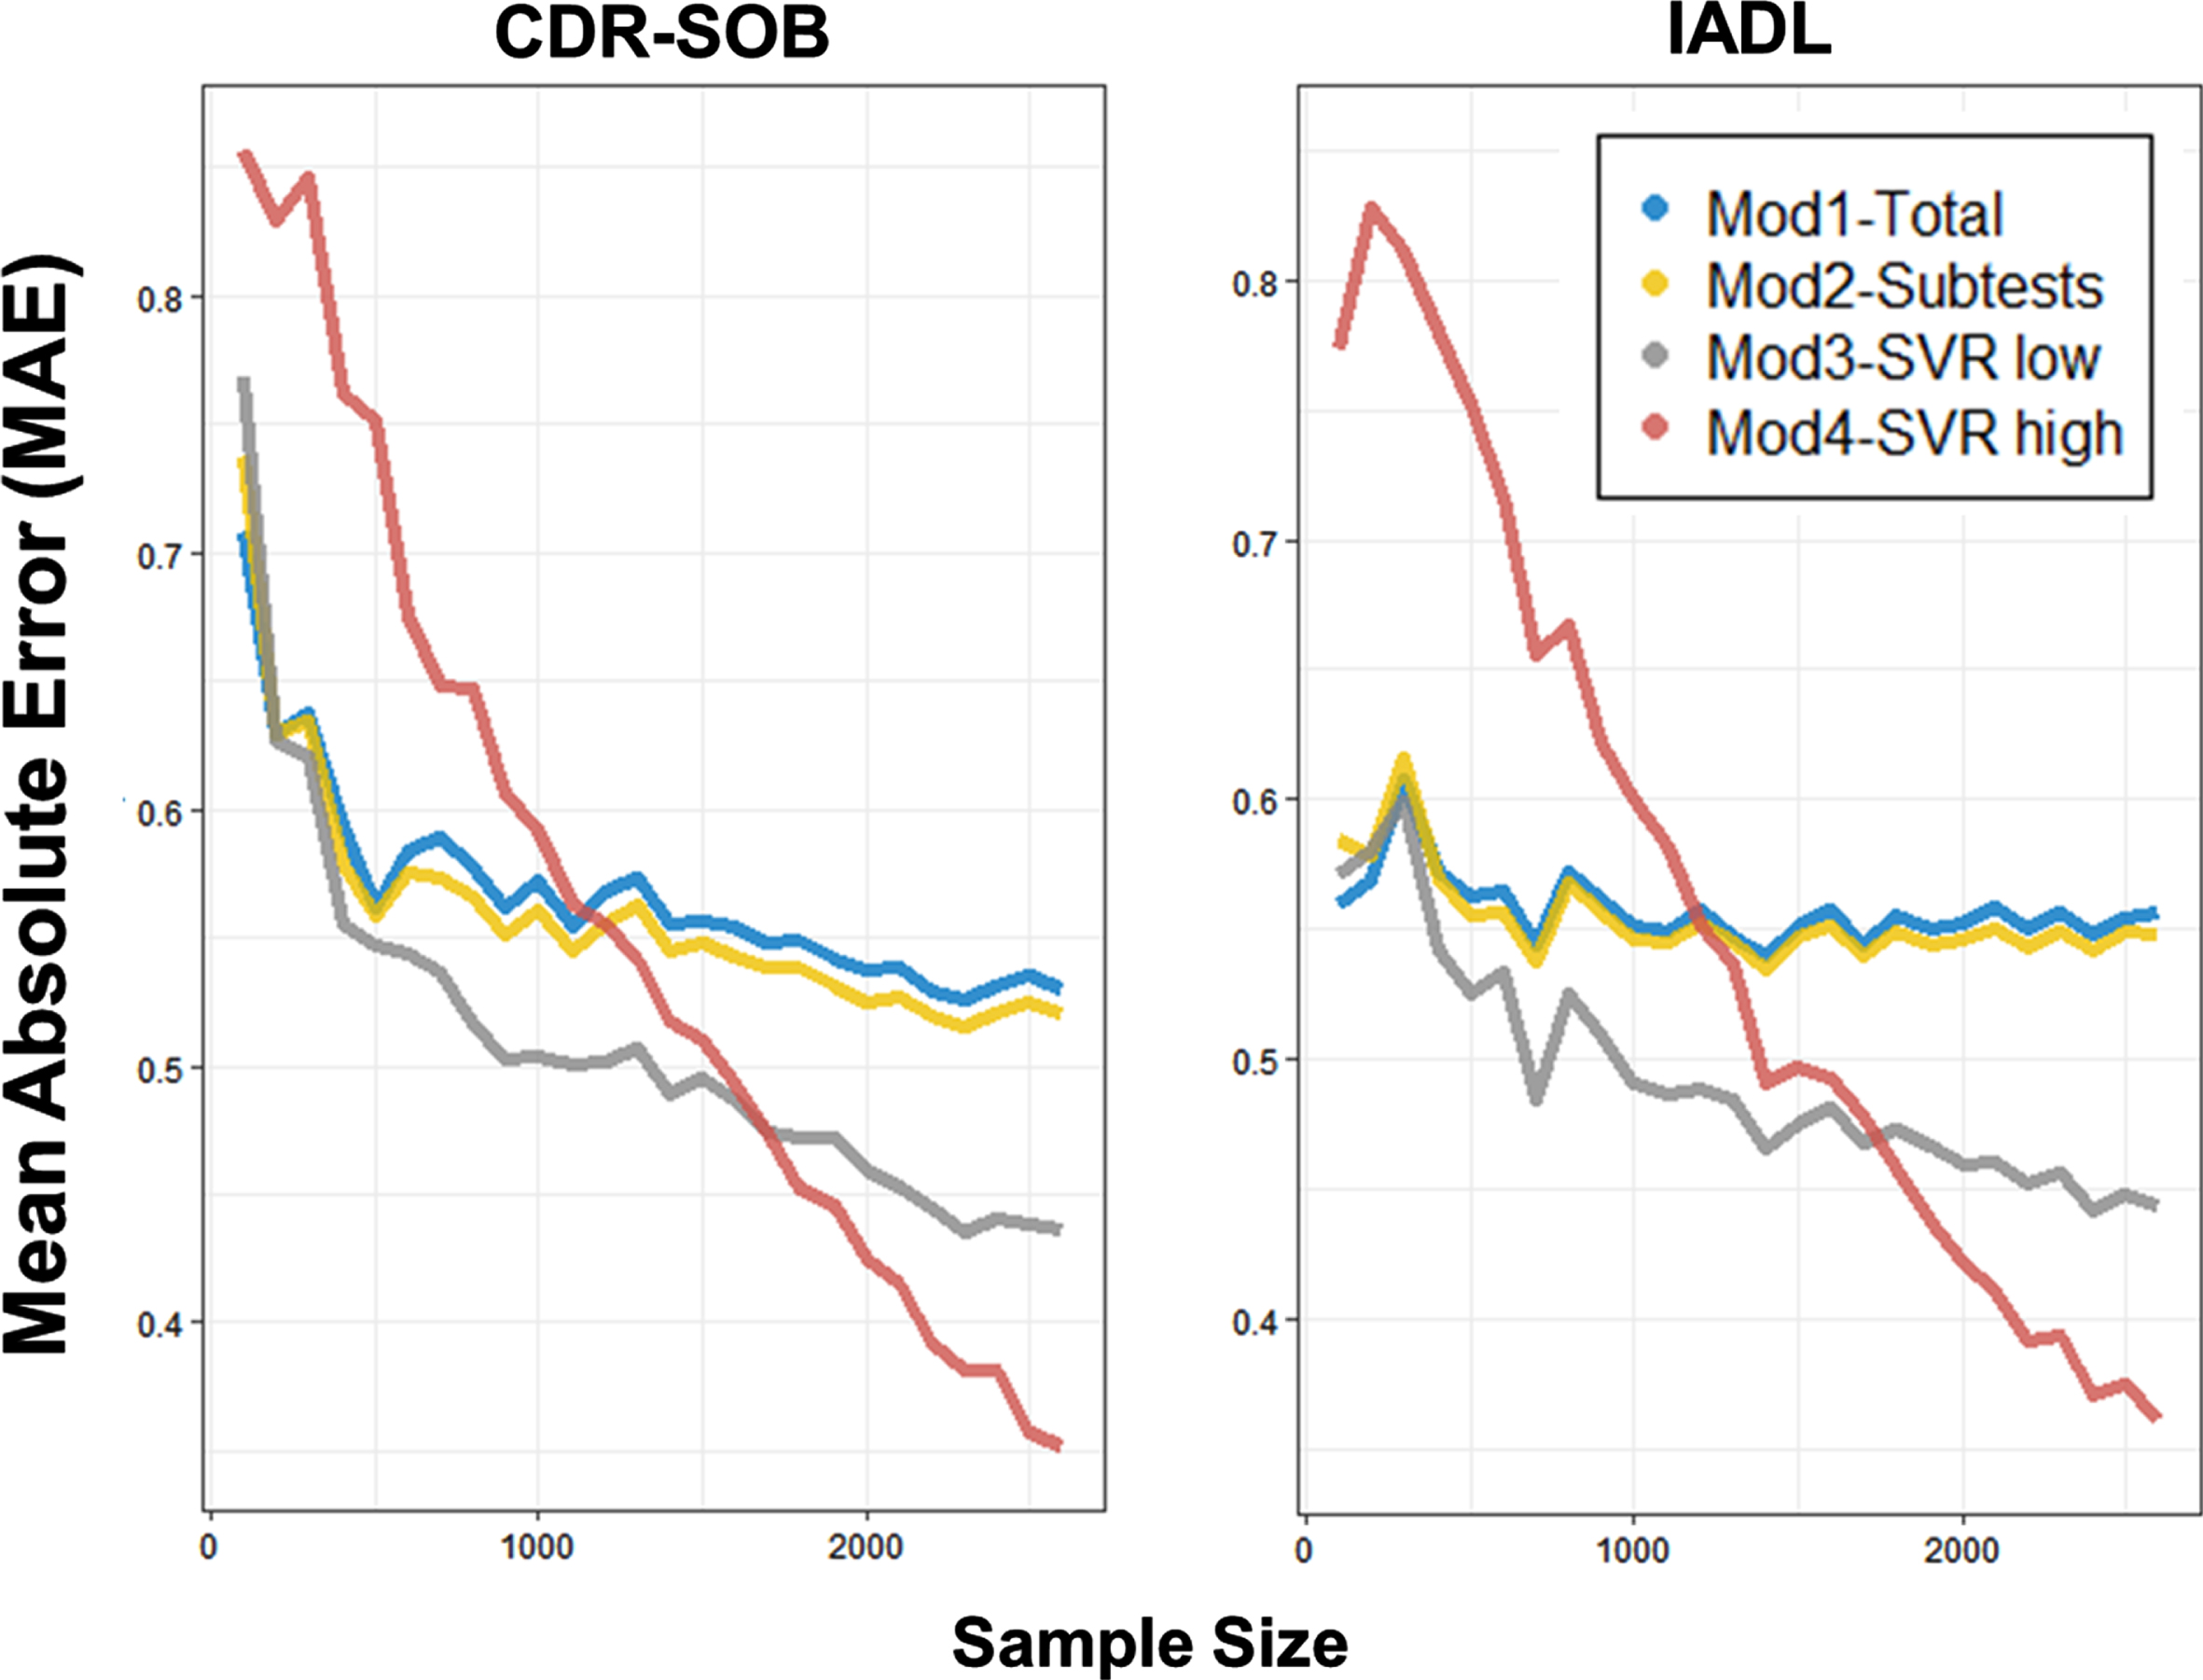 Sample size effects on the predictive accuracy of Clinical severity (CDR-SOB) and Instrumental daily functioning (IADL). Sample size increased from 100 to 2,600 by 100 units.